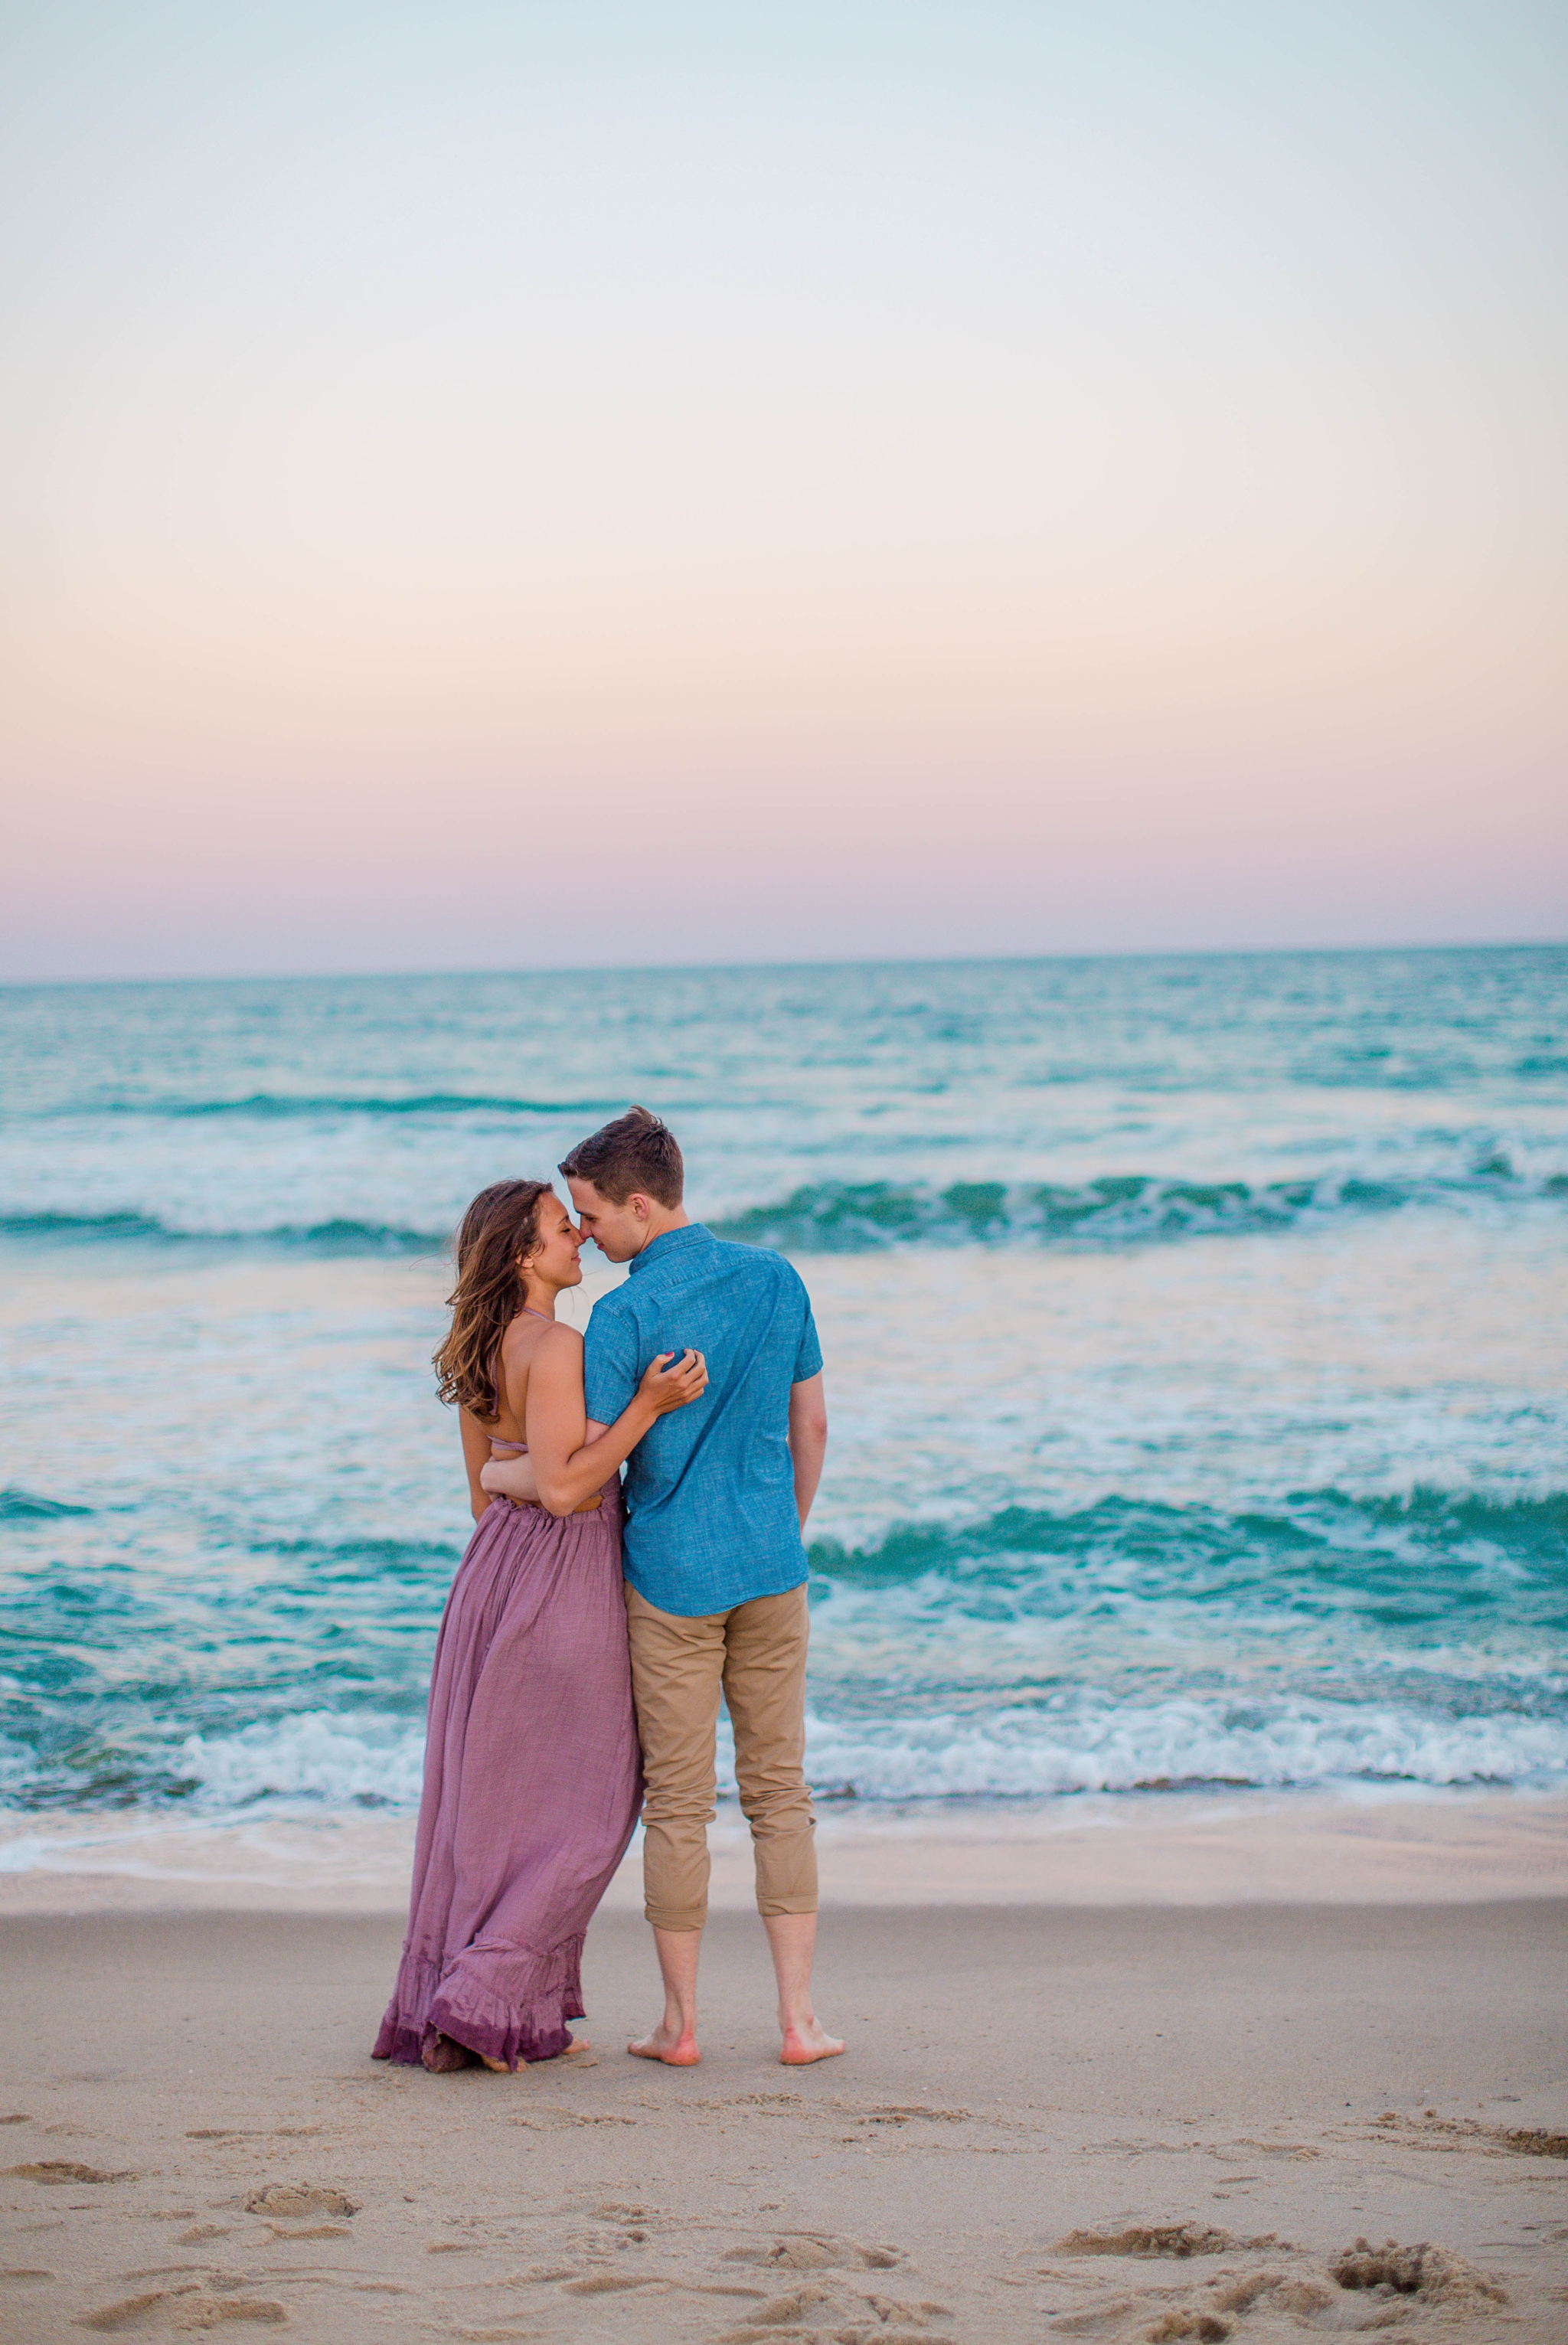  man and woman kissing in front of the sunset - - Woman is in a flowy pastel maxi dress - candid and unposed golden light session - beach engagement photographer in honolulu, oahu, hawaii - johanna dye photography 